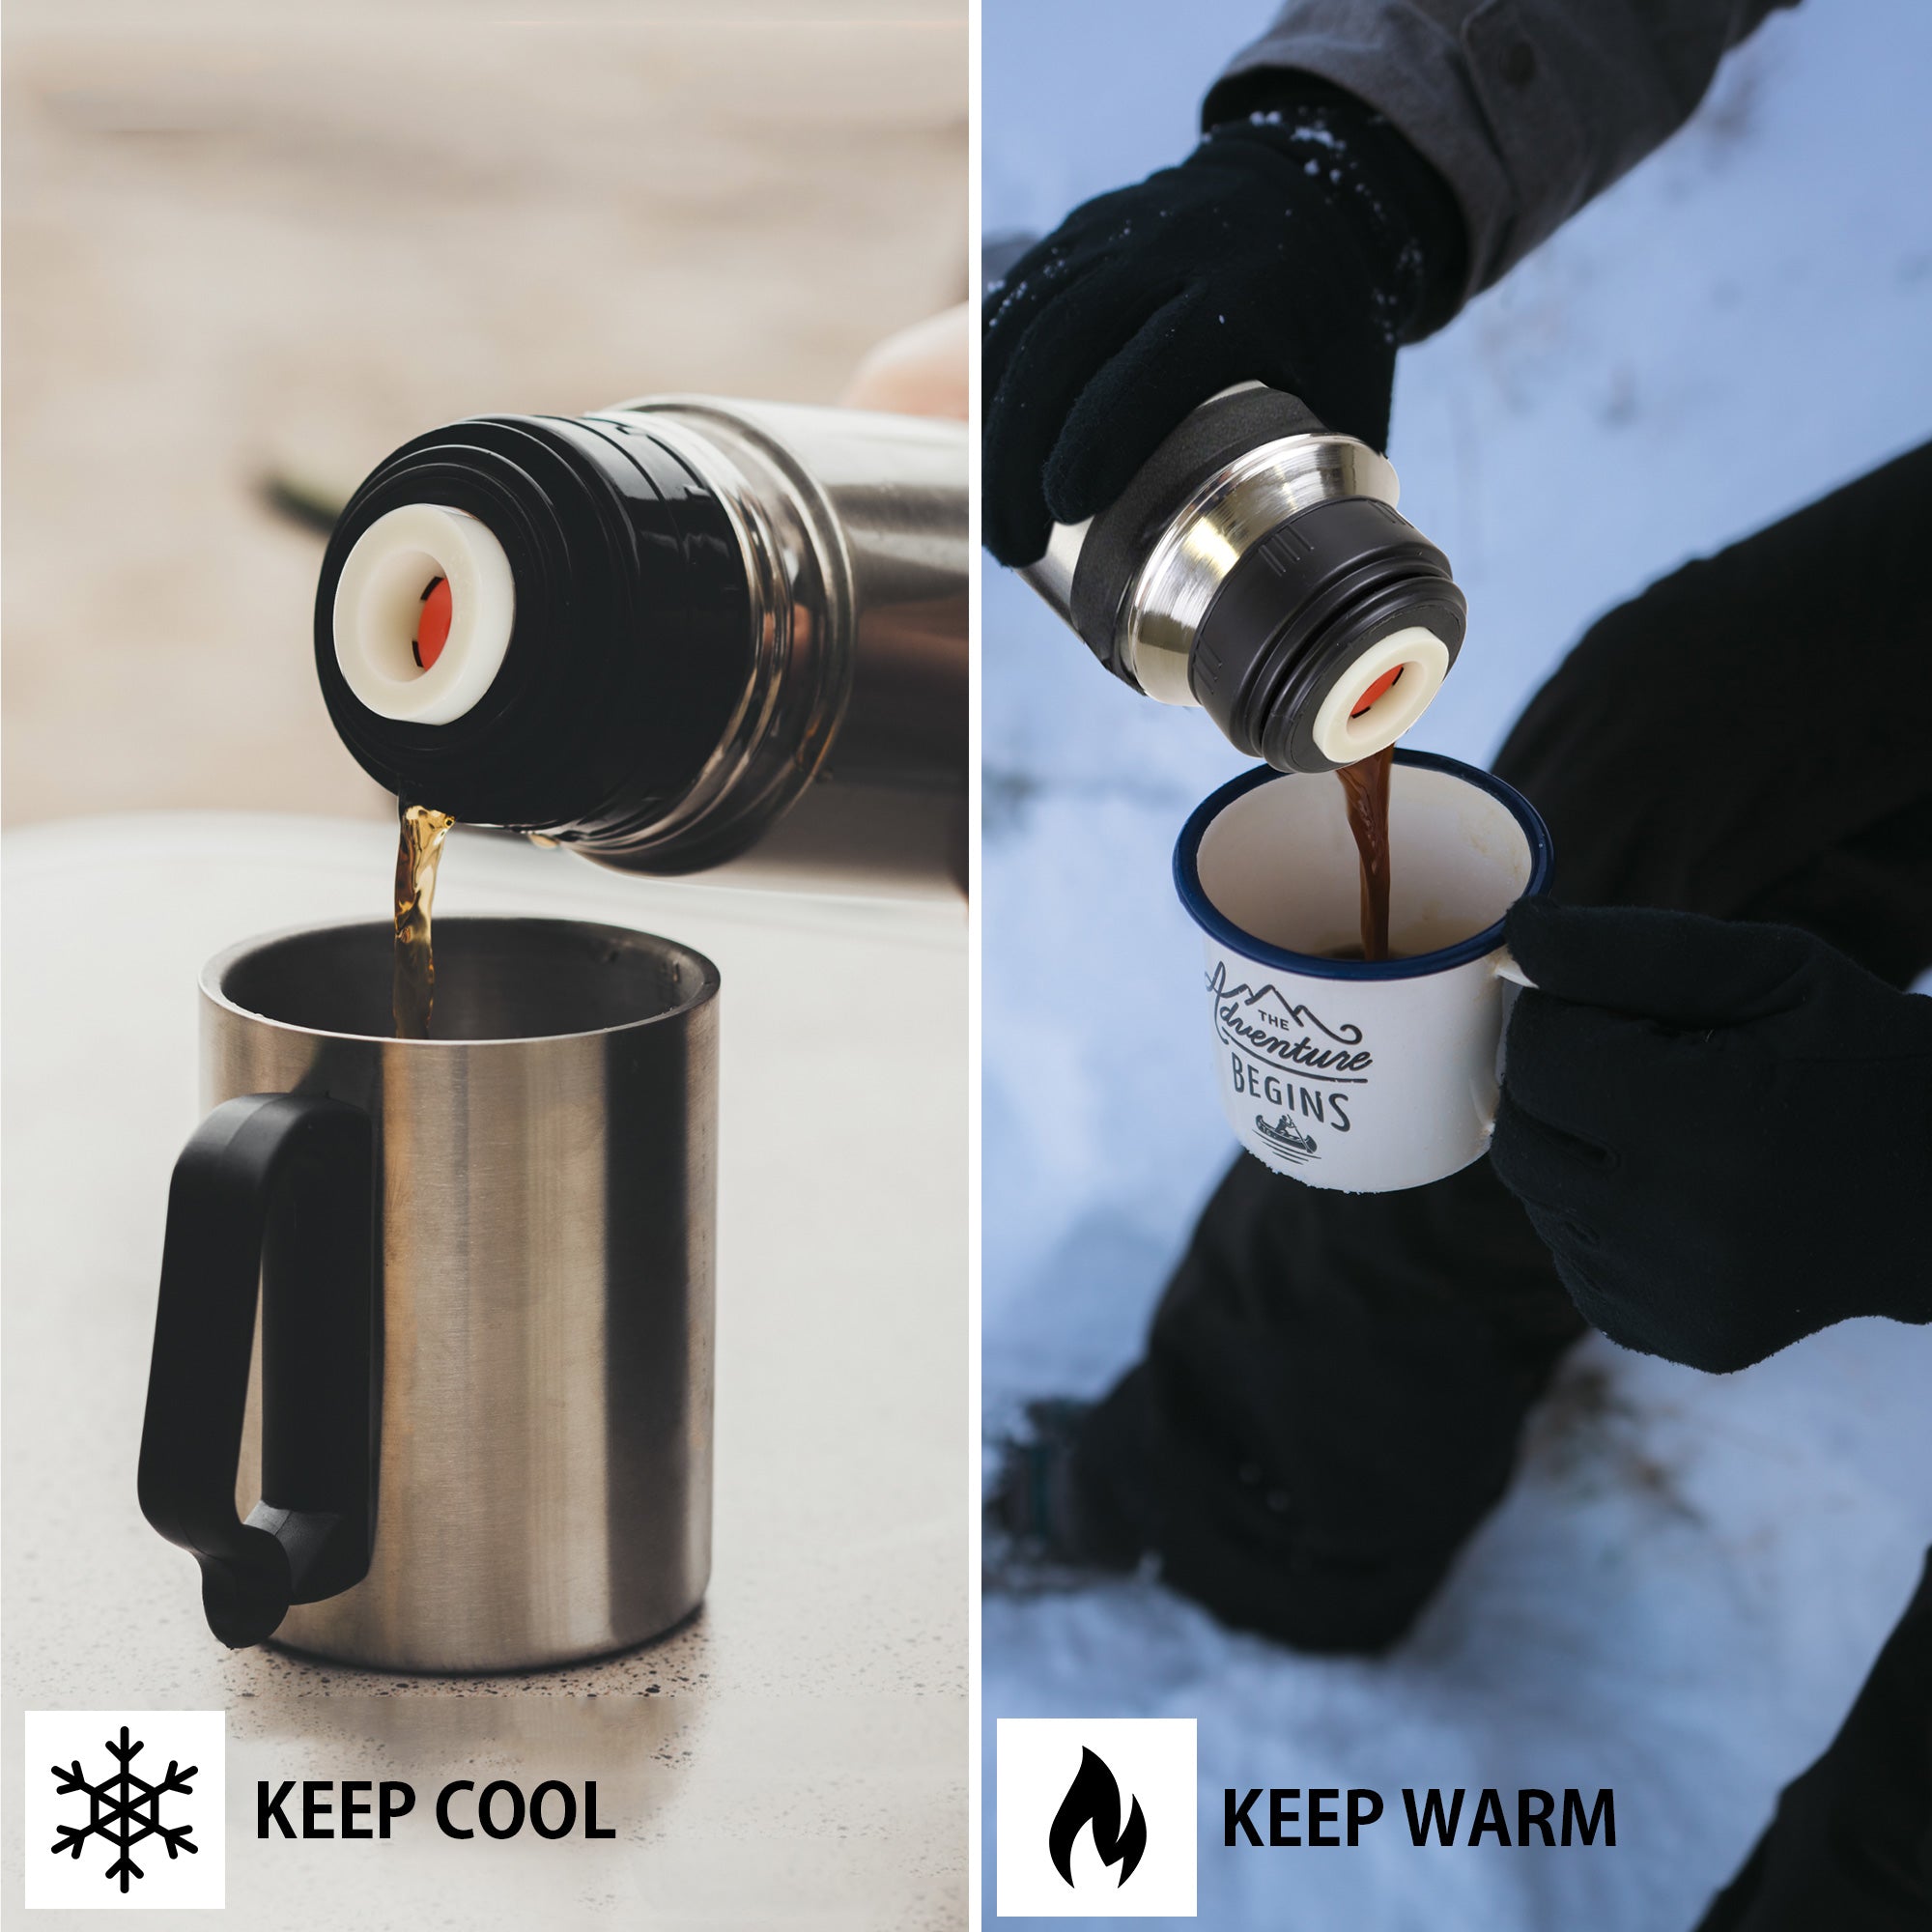 Two side by side lifestyle images: Left image shows water being poured from the bottle into a large stainless steel mug with text below reading, "Keep cool." Right side image shows a person wearing black winter clothing sitting in the snow pouring coffee into a white enamel mug with text below reading, "Keep warm."